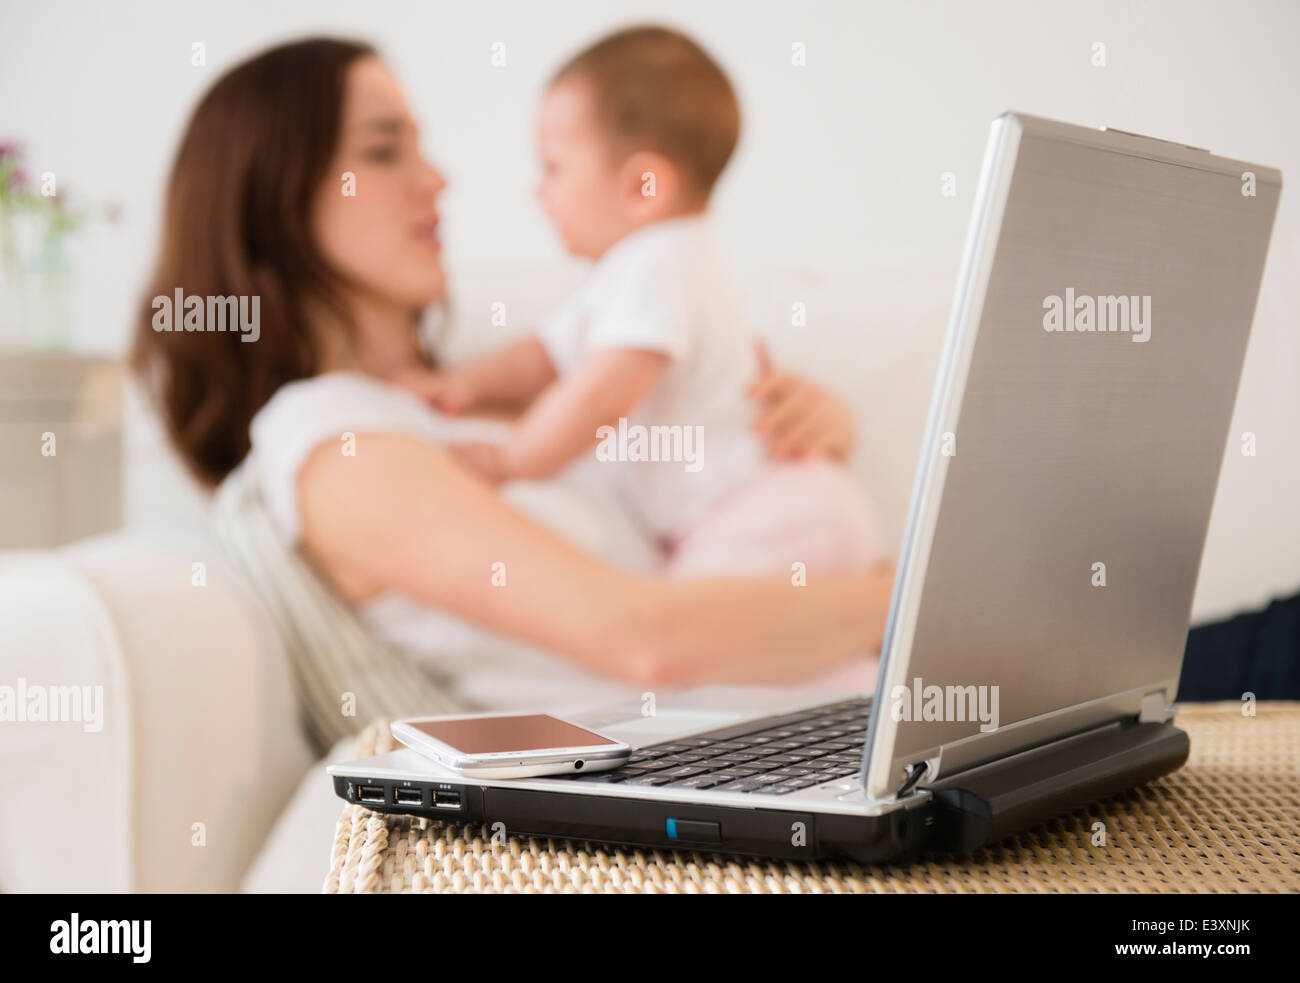 Laptop and cell phone beside mother with baby Stock Photo